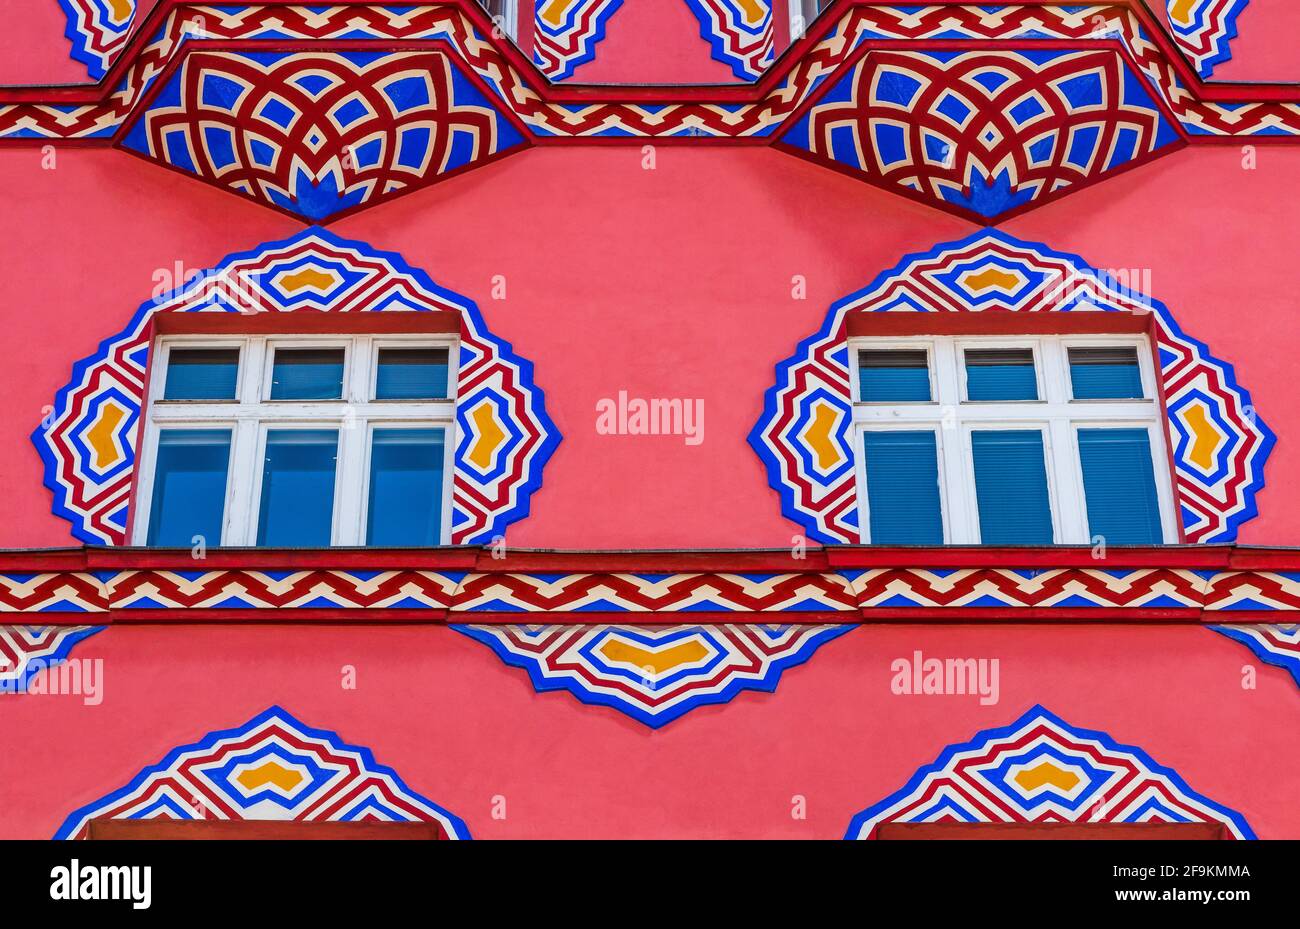 Ljubljana, Slovenia - August 16, 2019: Detail of Vurnik house or the Cooperative Business Bank building. Stock Photo